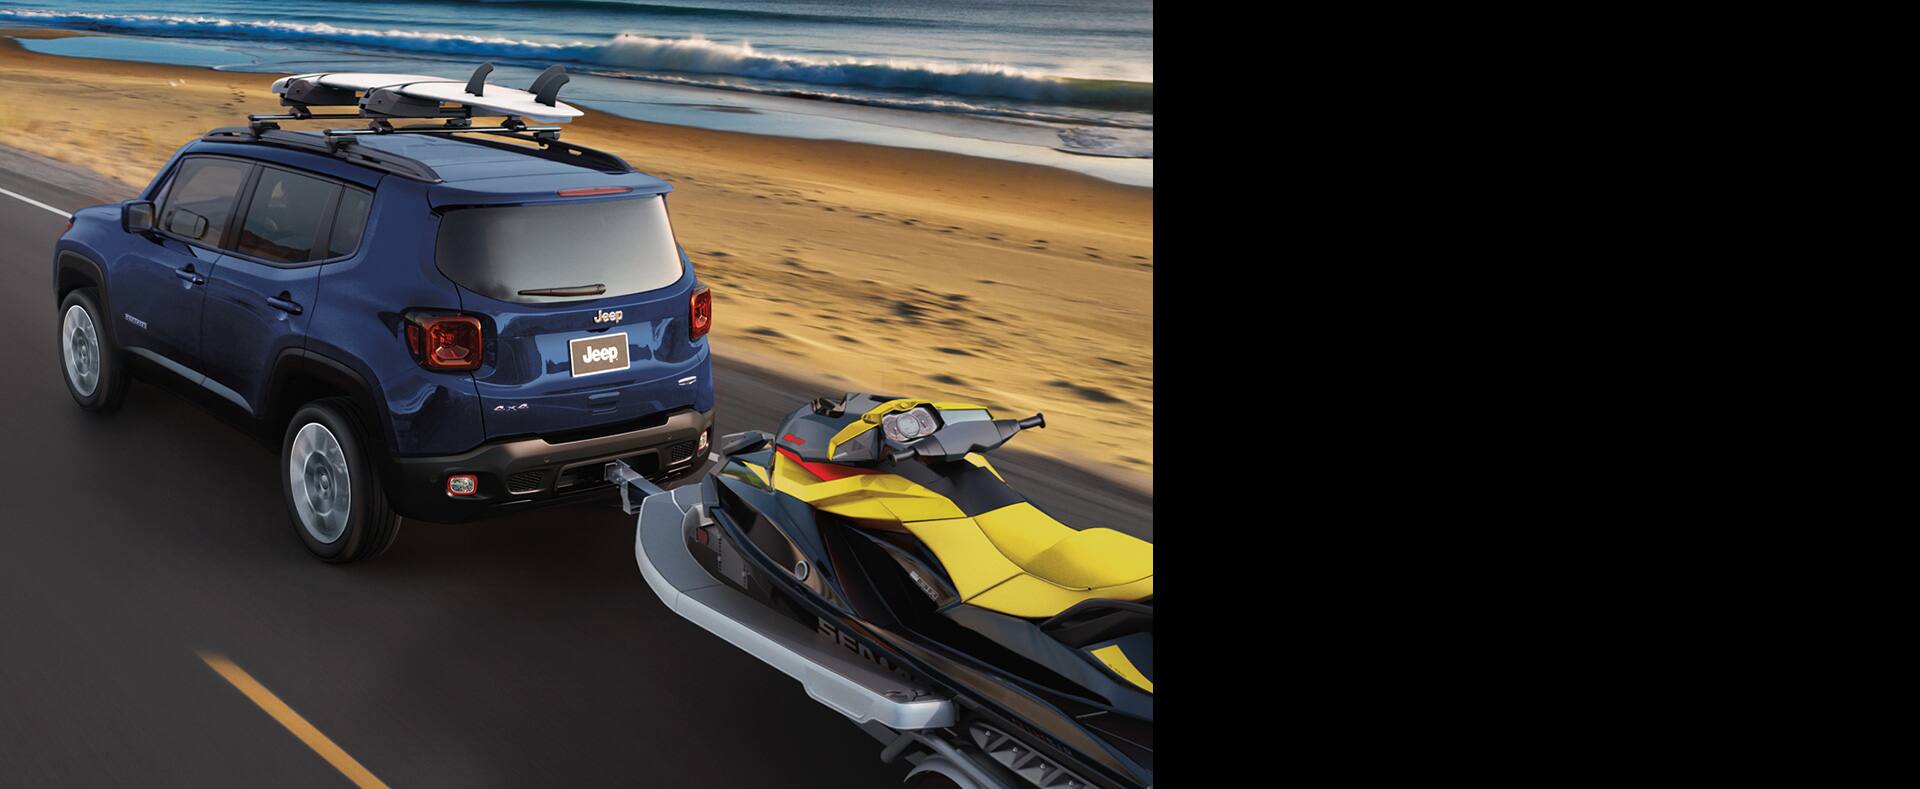 2021 Jeep Renegade tows an ATV and carries a surfboard on its roof rack as it is driven on a beachside road.